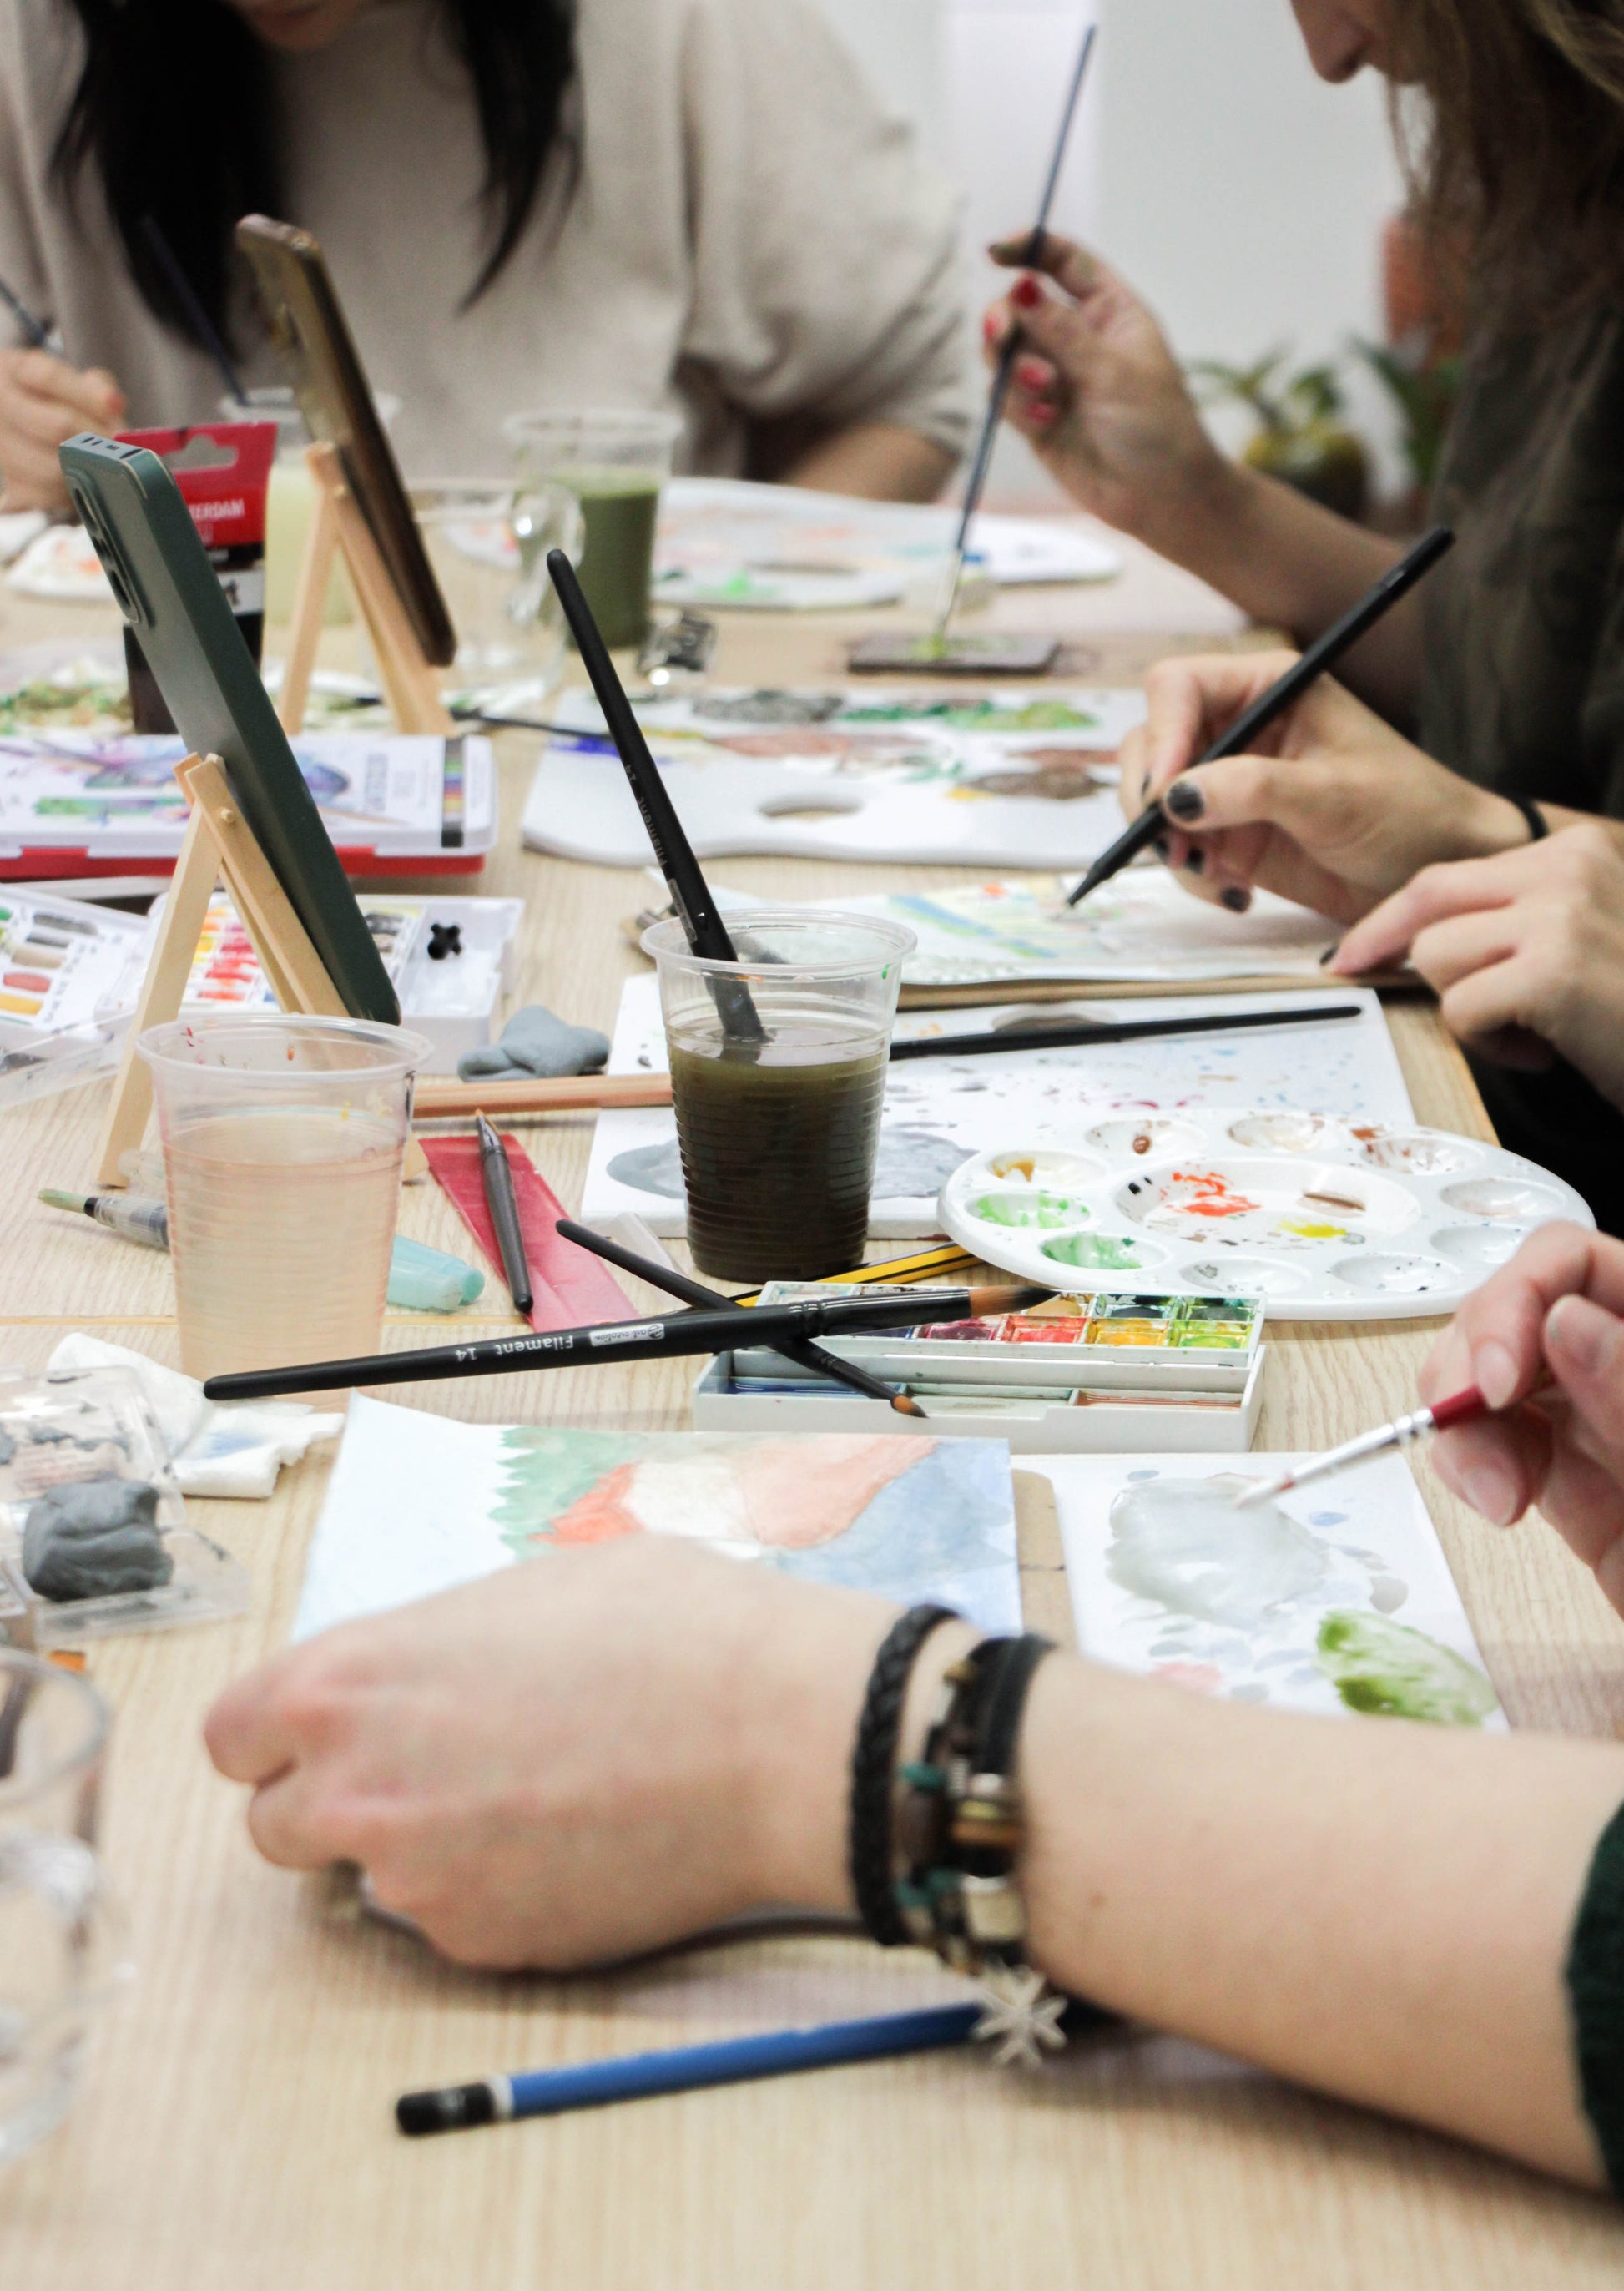 Painting Workshop "Experiences in Acrylic Painting" with Carolina in Porto, Portugal by subcultours